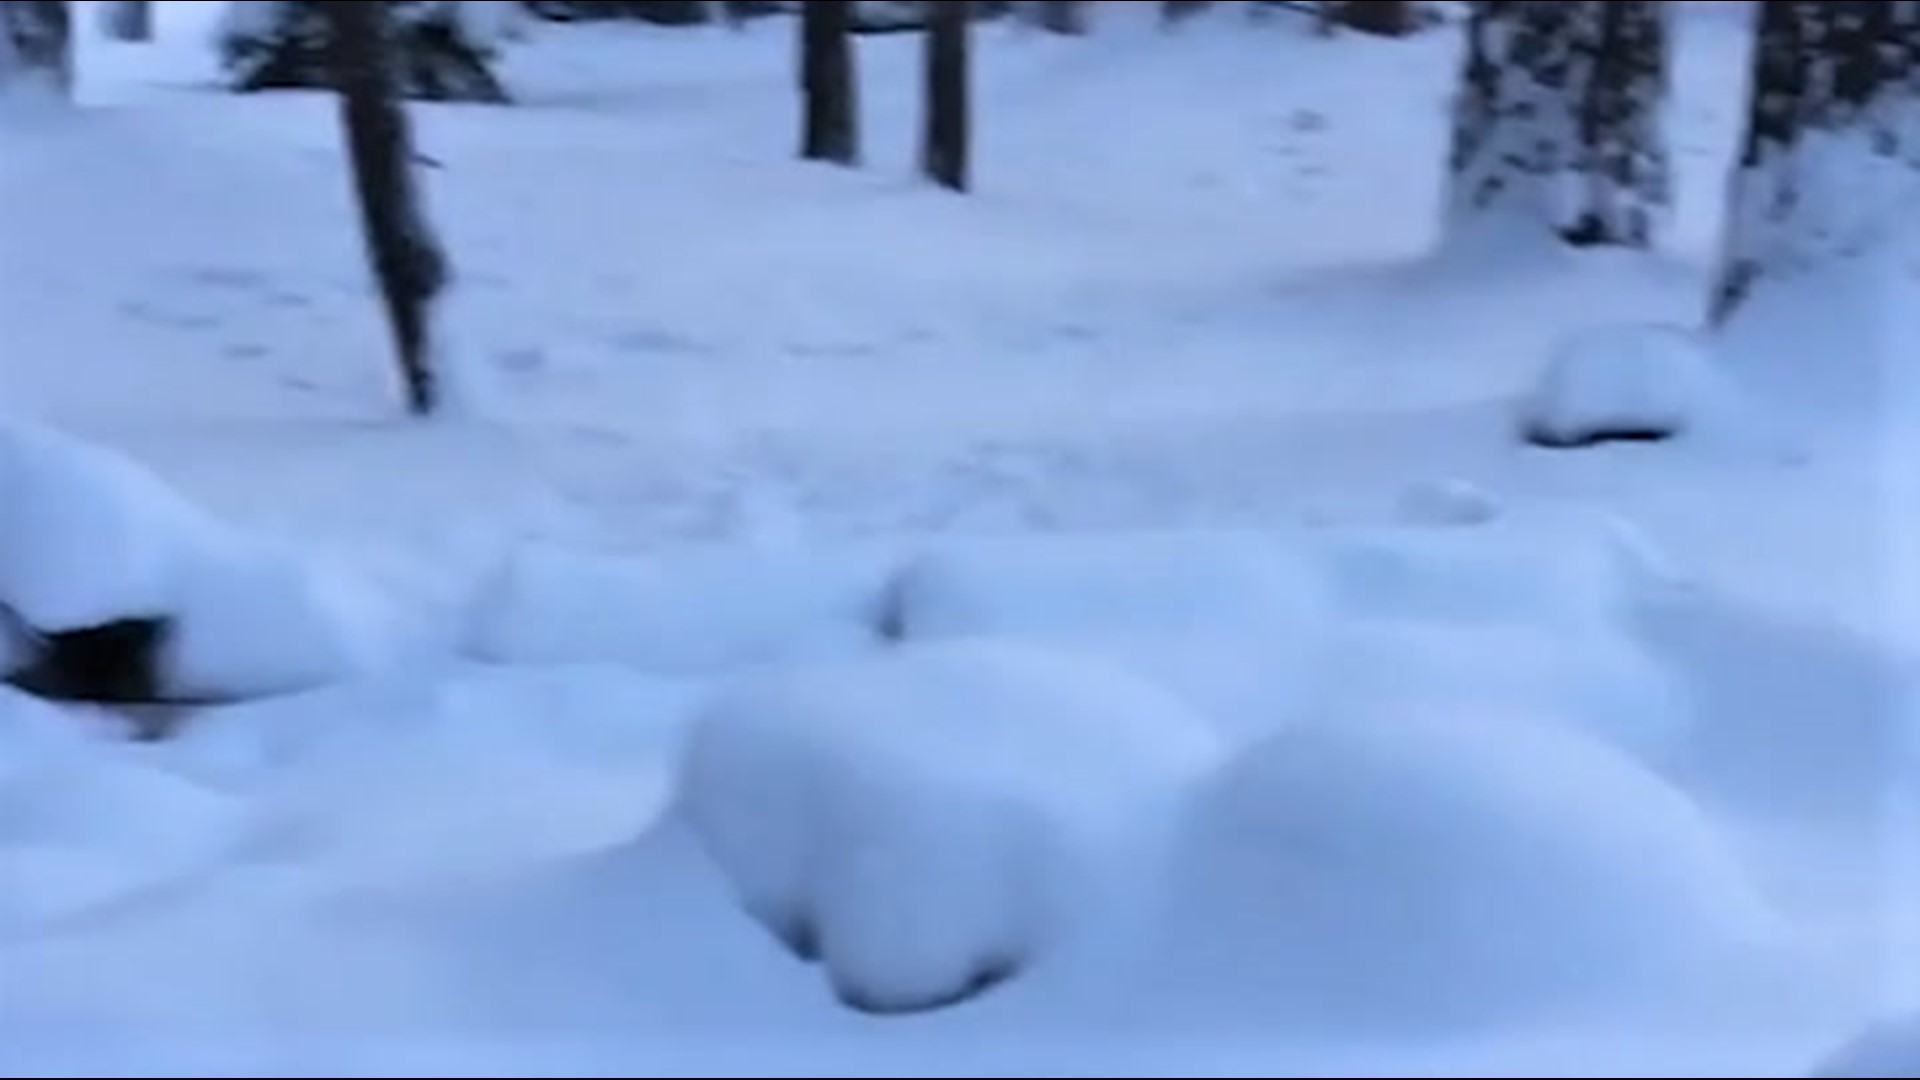 On Monday, March 6, a heavy load of snow arrived in Lake Tahoe, California.